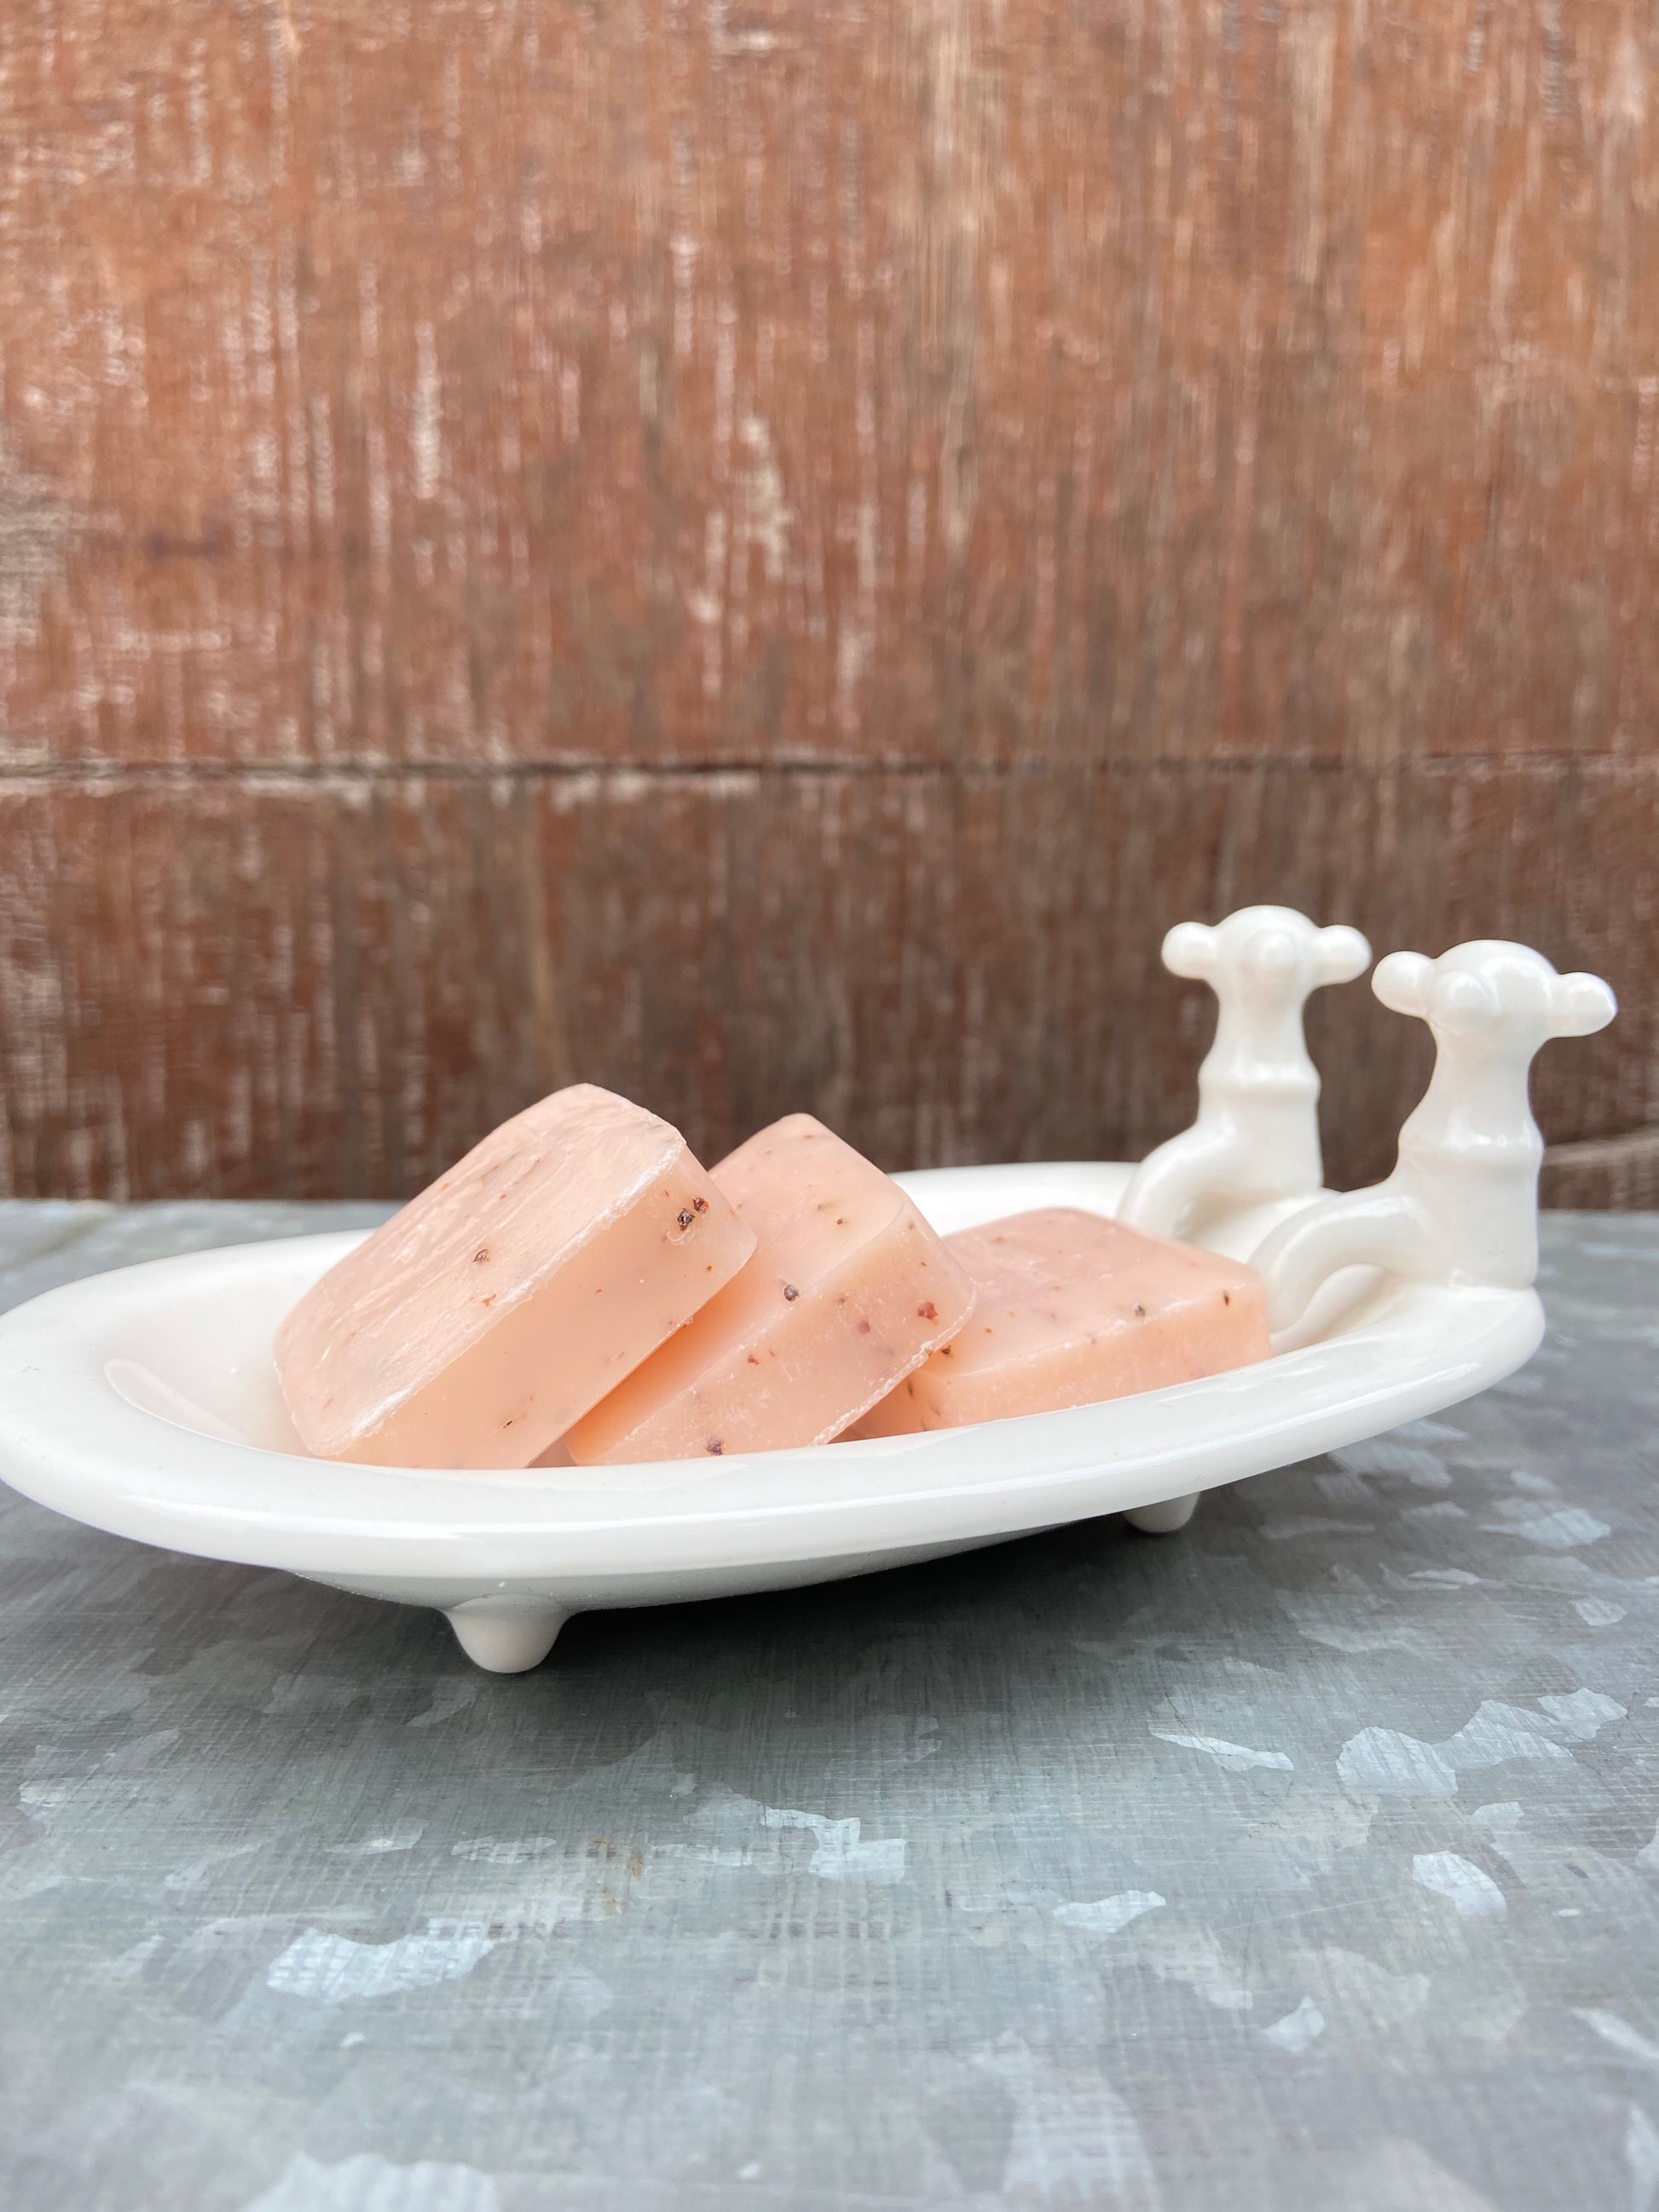 Adorable old style bathtub soap dish. This oval 6” long ceramic bathtub soap holder has a classic ivory finish and works great for the kitchen or bathroom, either for yourself or makes a terrific gift!